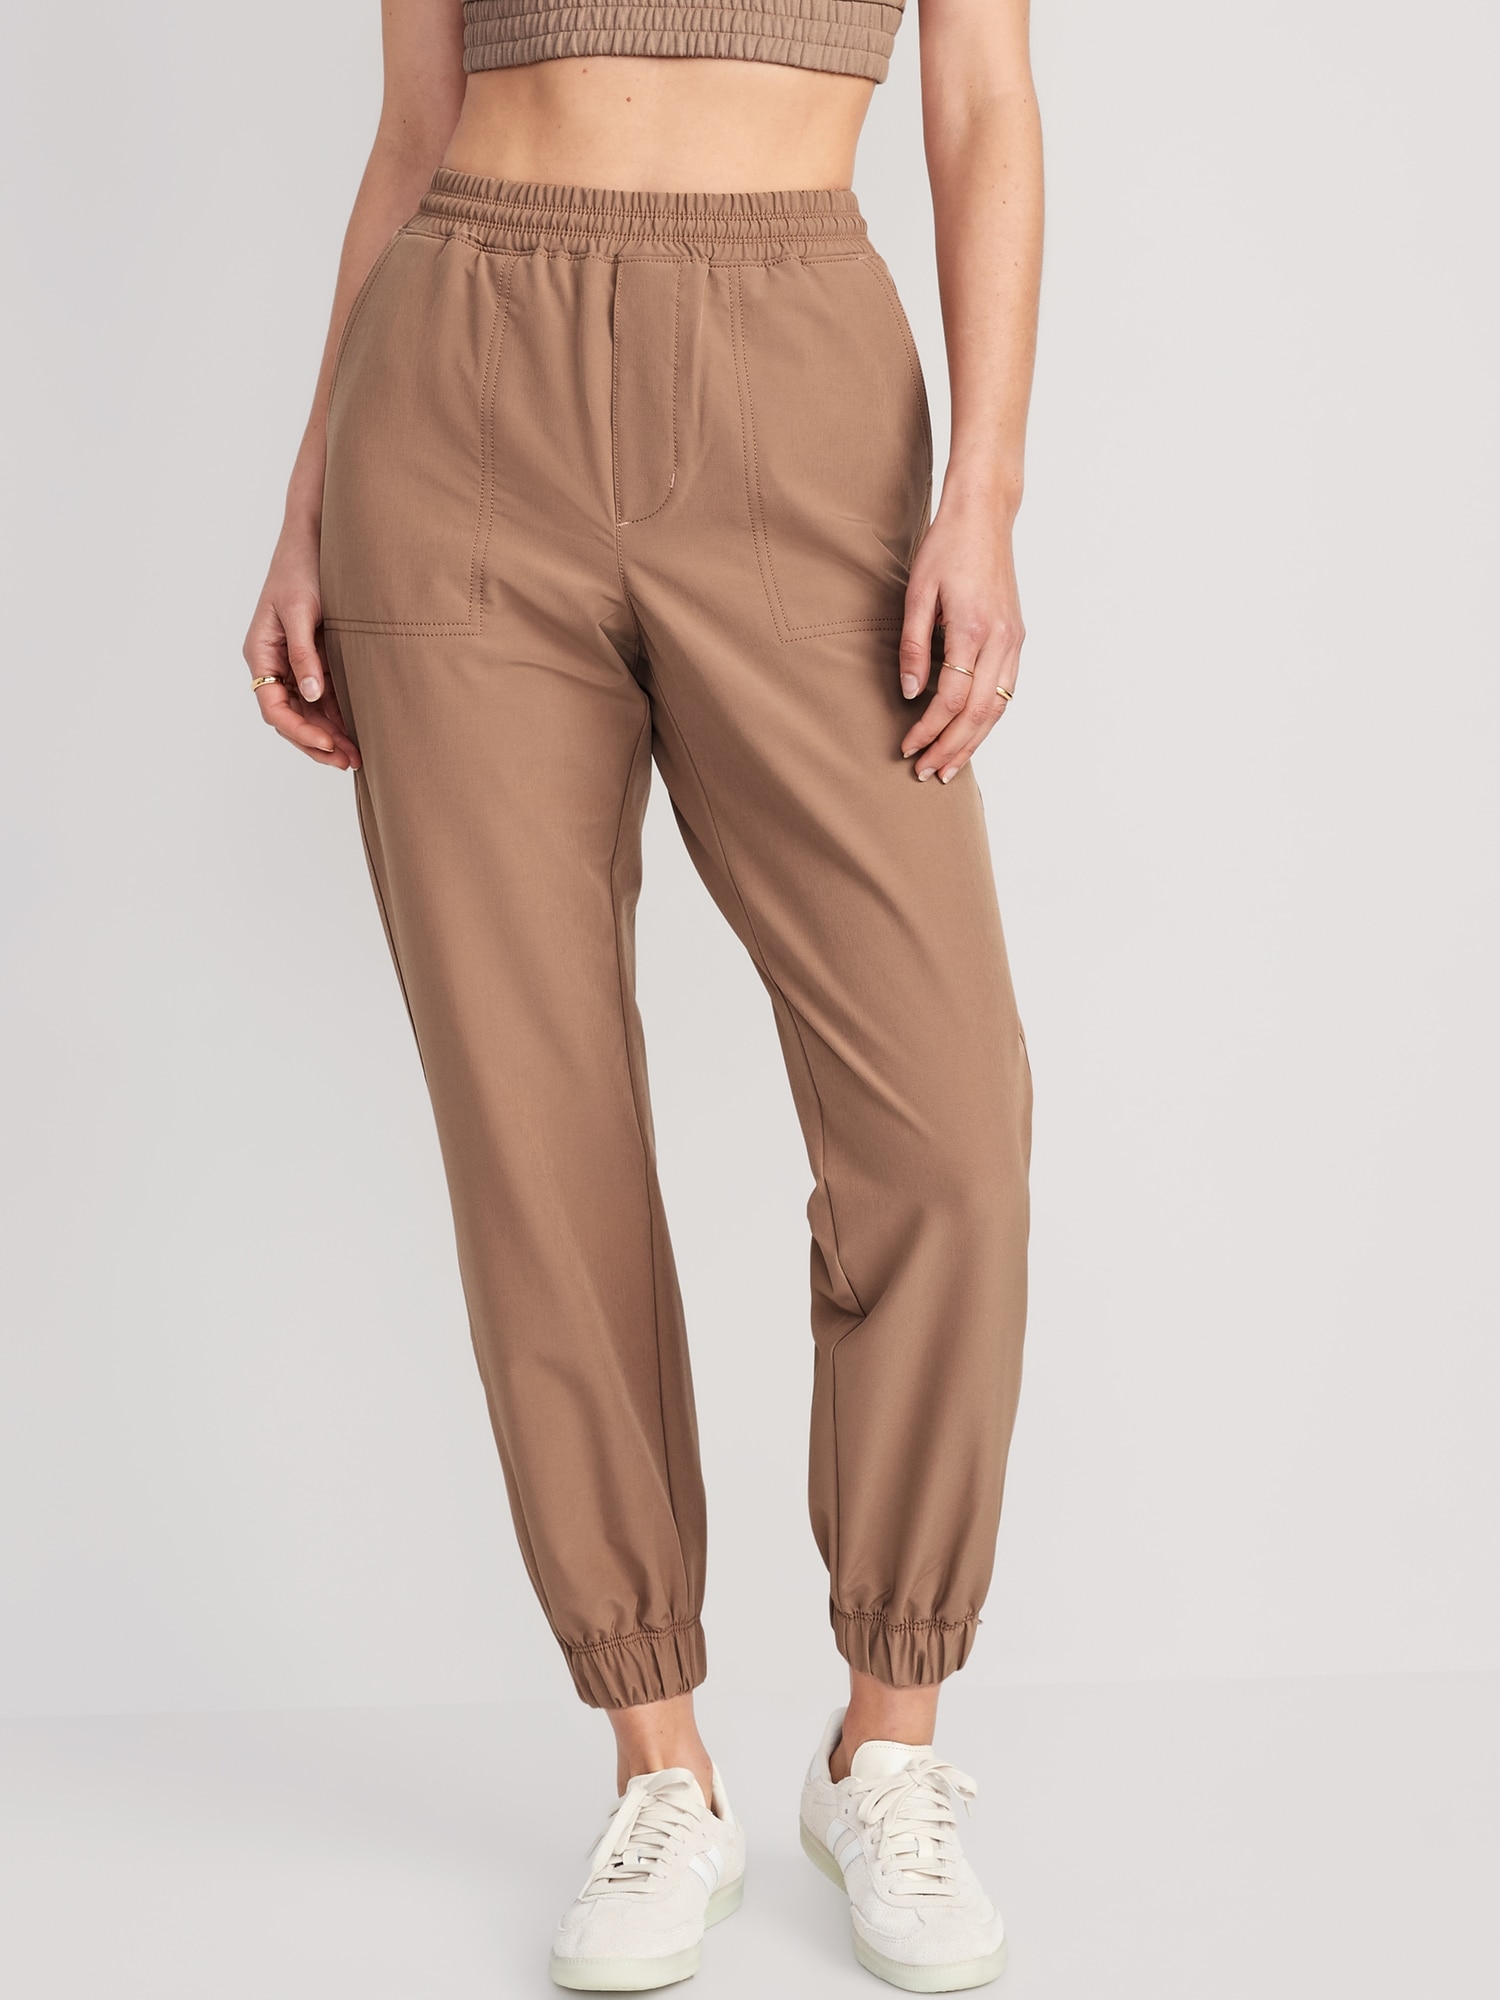 High-Waisted All-Seasons StretchTech Joggers, Old Navy